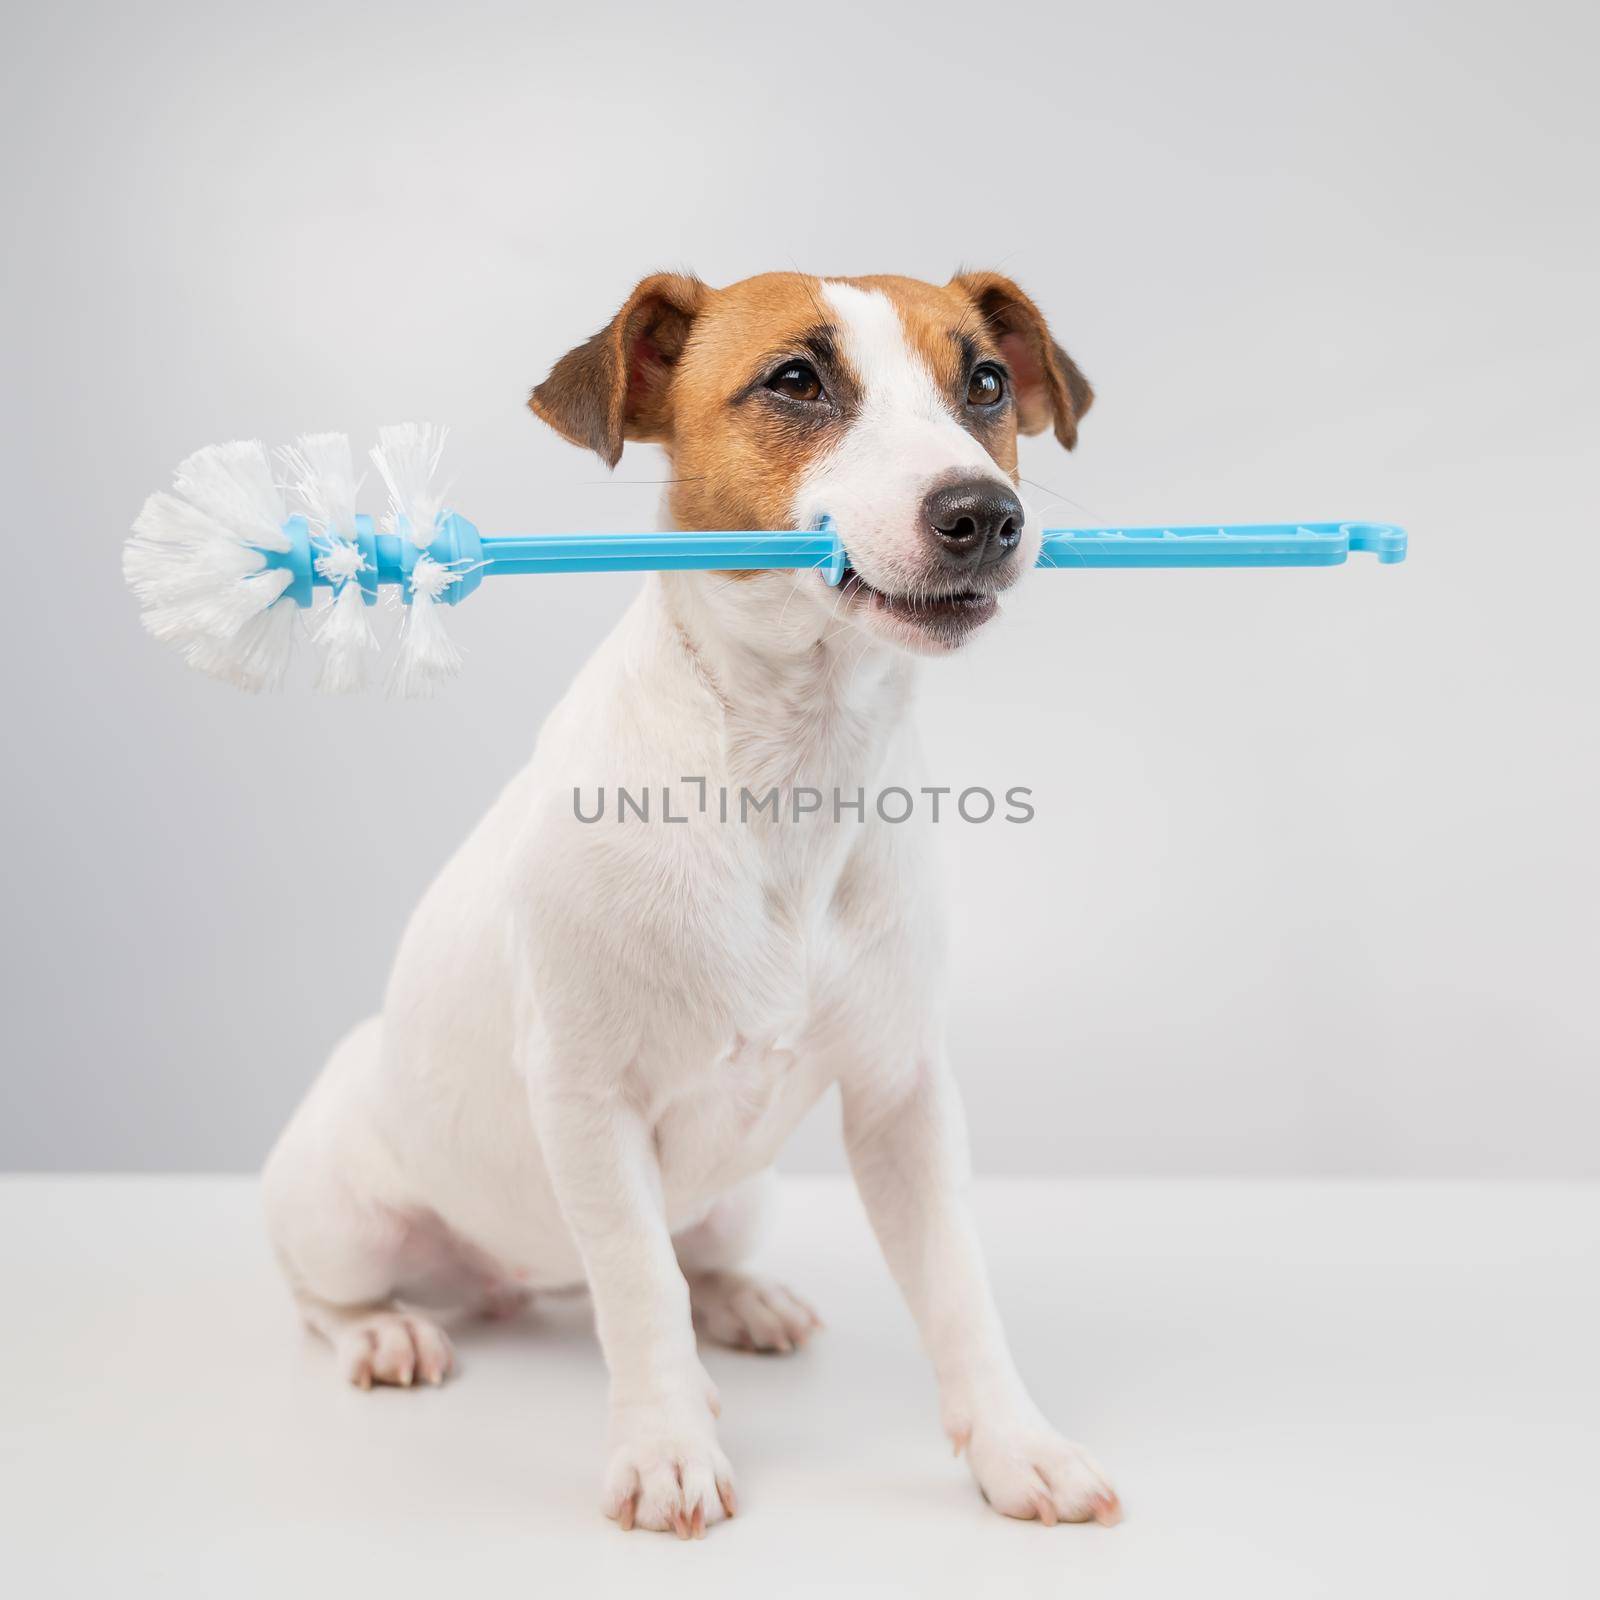 Jack russell terrier dog holds a blue toilet brush in his mouth. Plumbing cleaner.